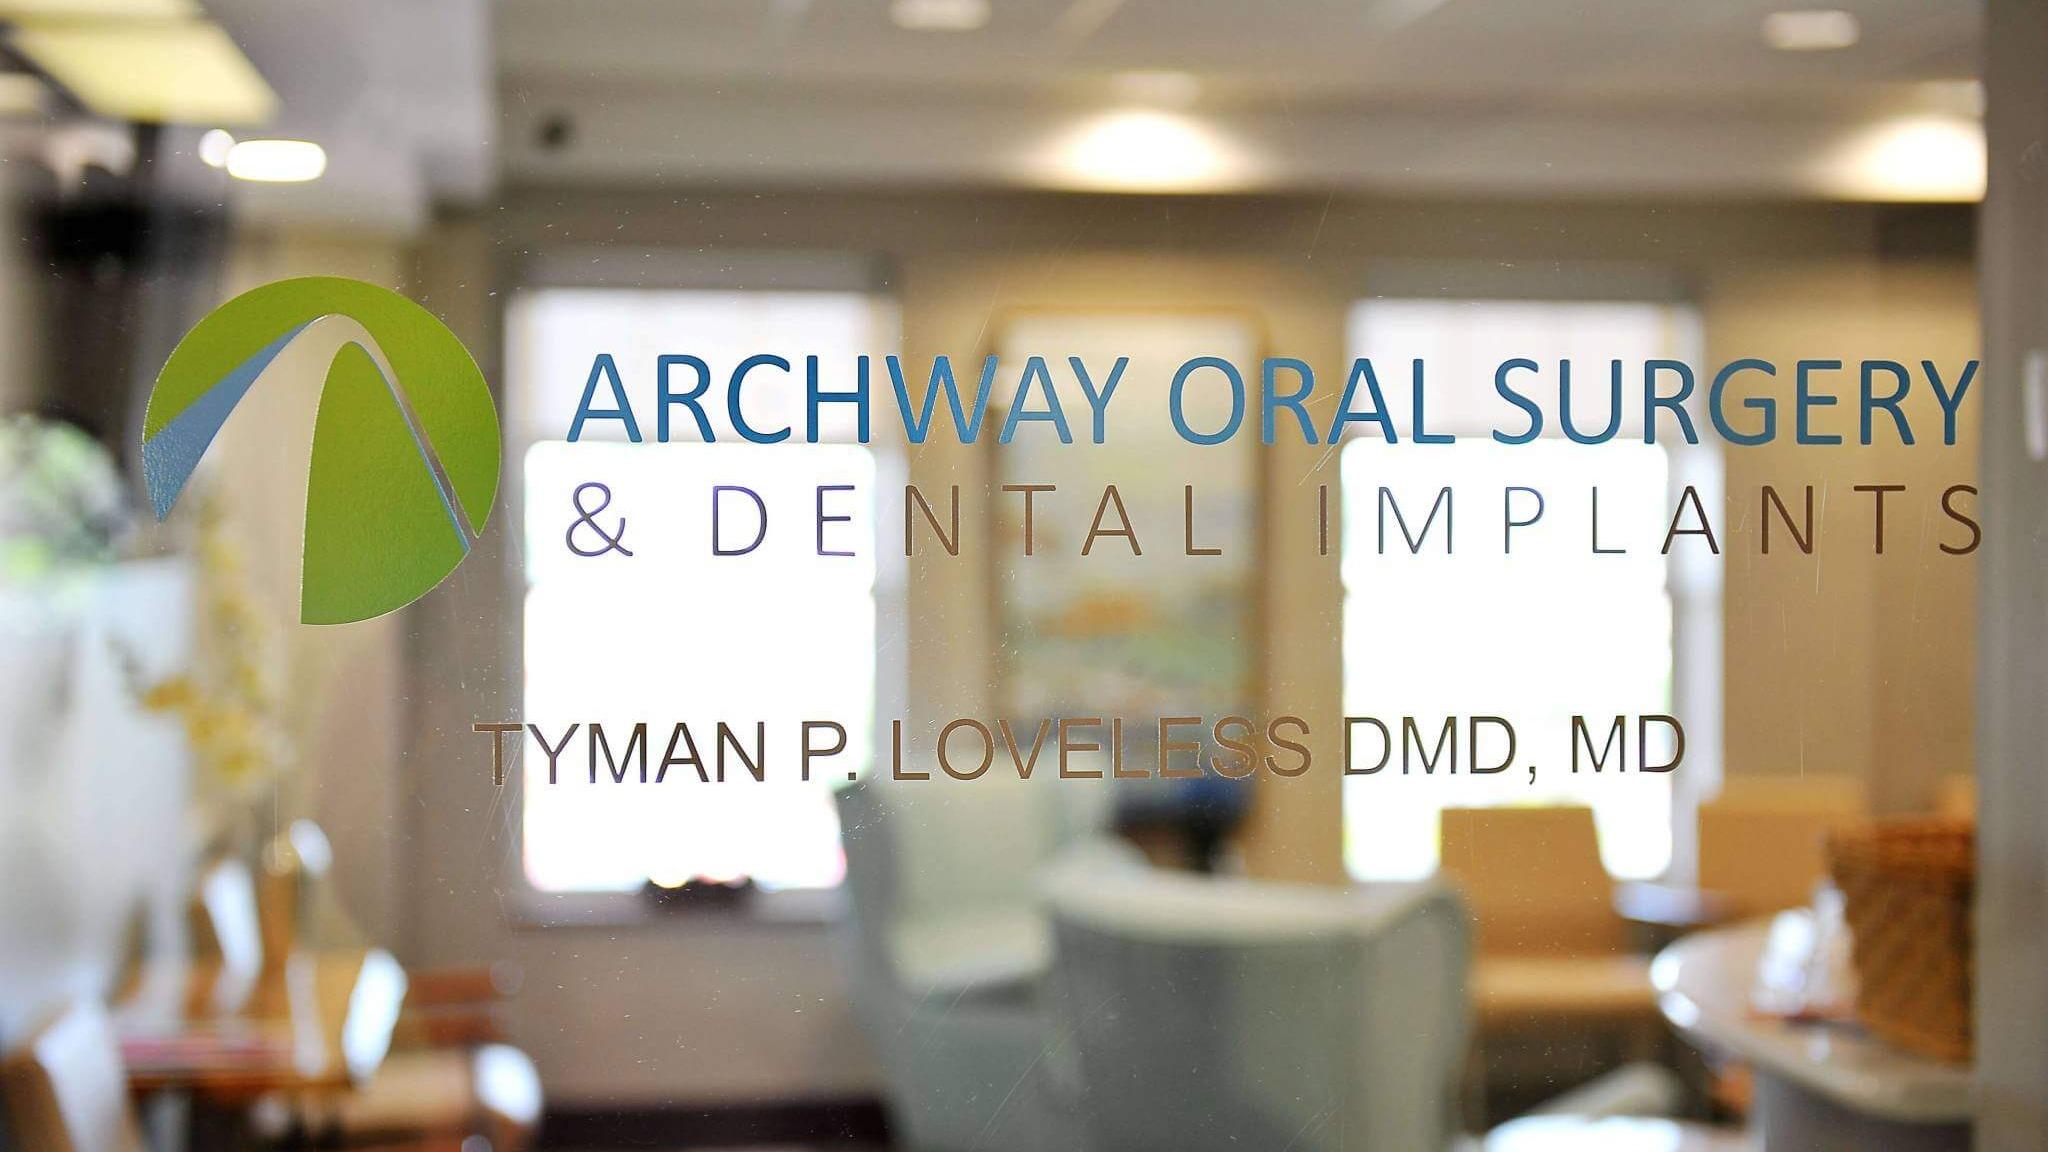 Archway Oral Surgery and Dental Implants Photo